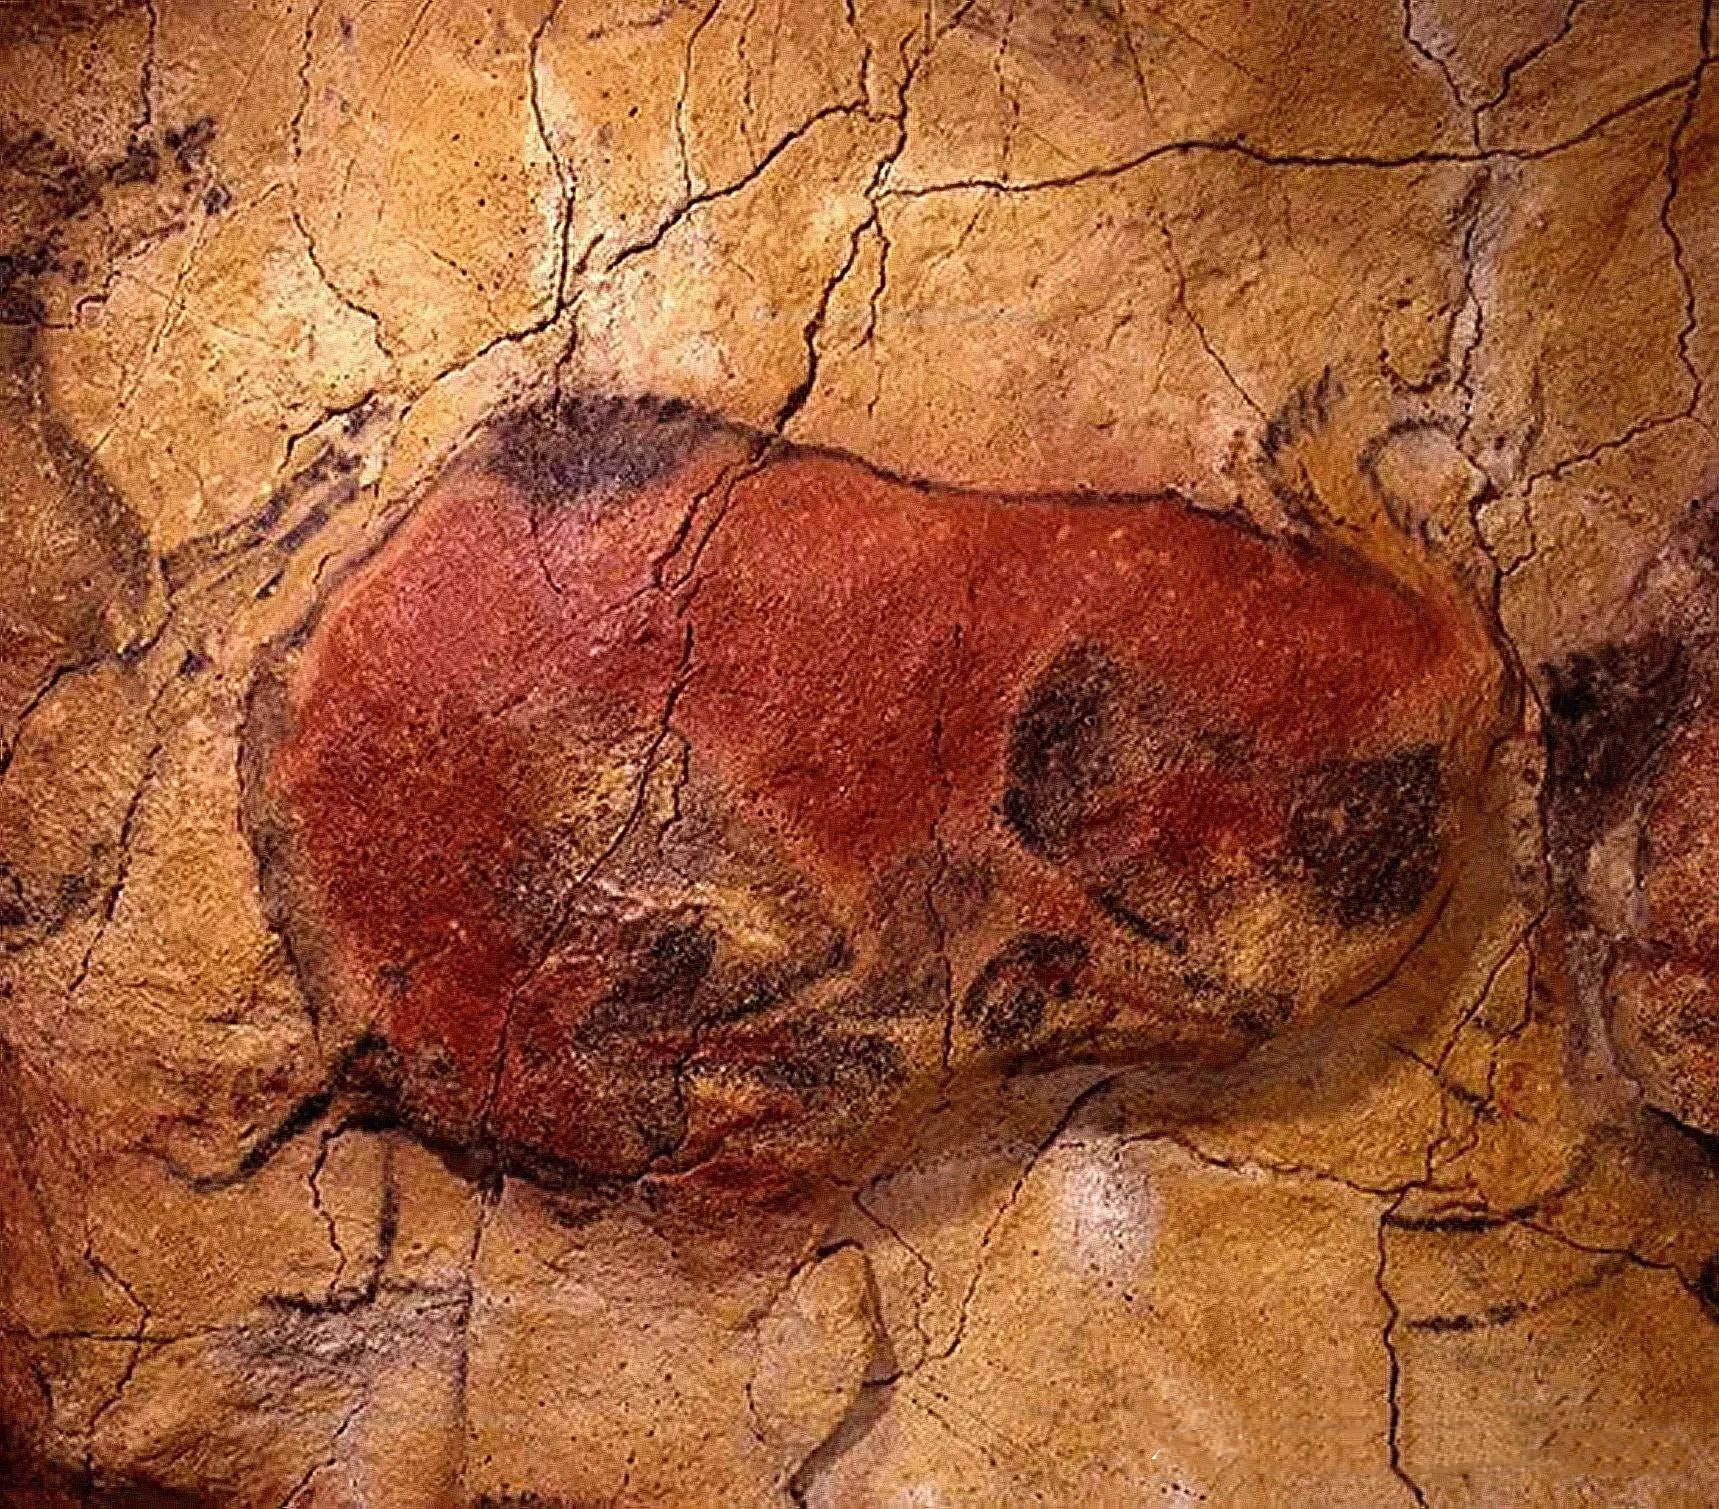  Prehistoric paintings in Spain’s Altamira cave, up to 20,000 years old